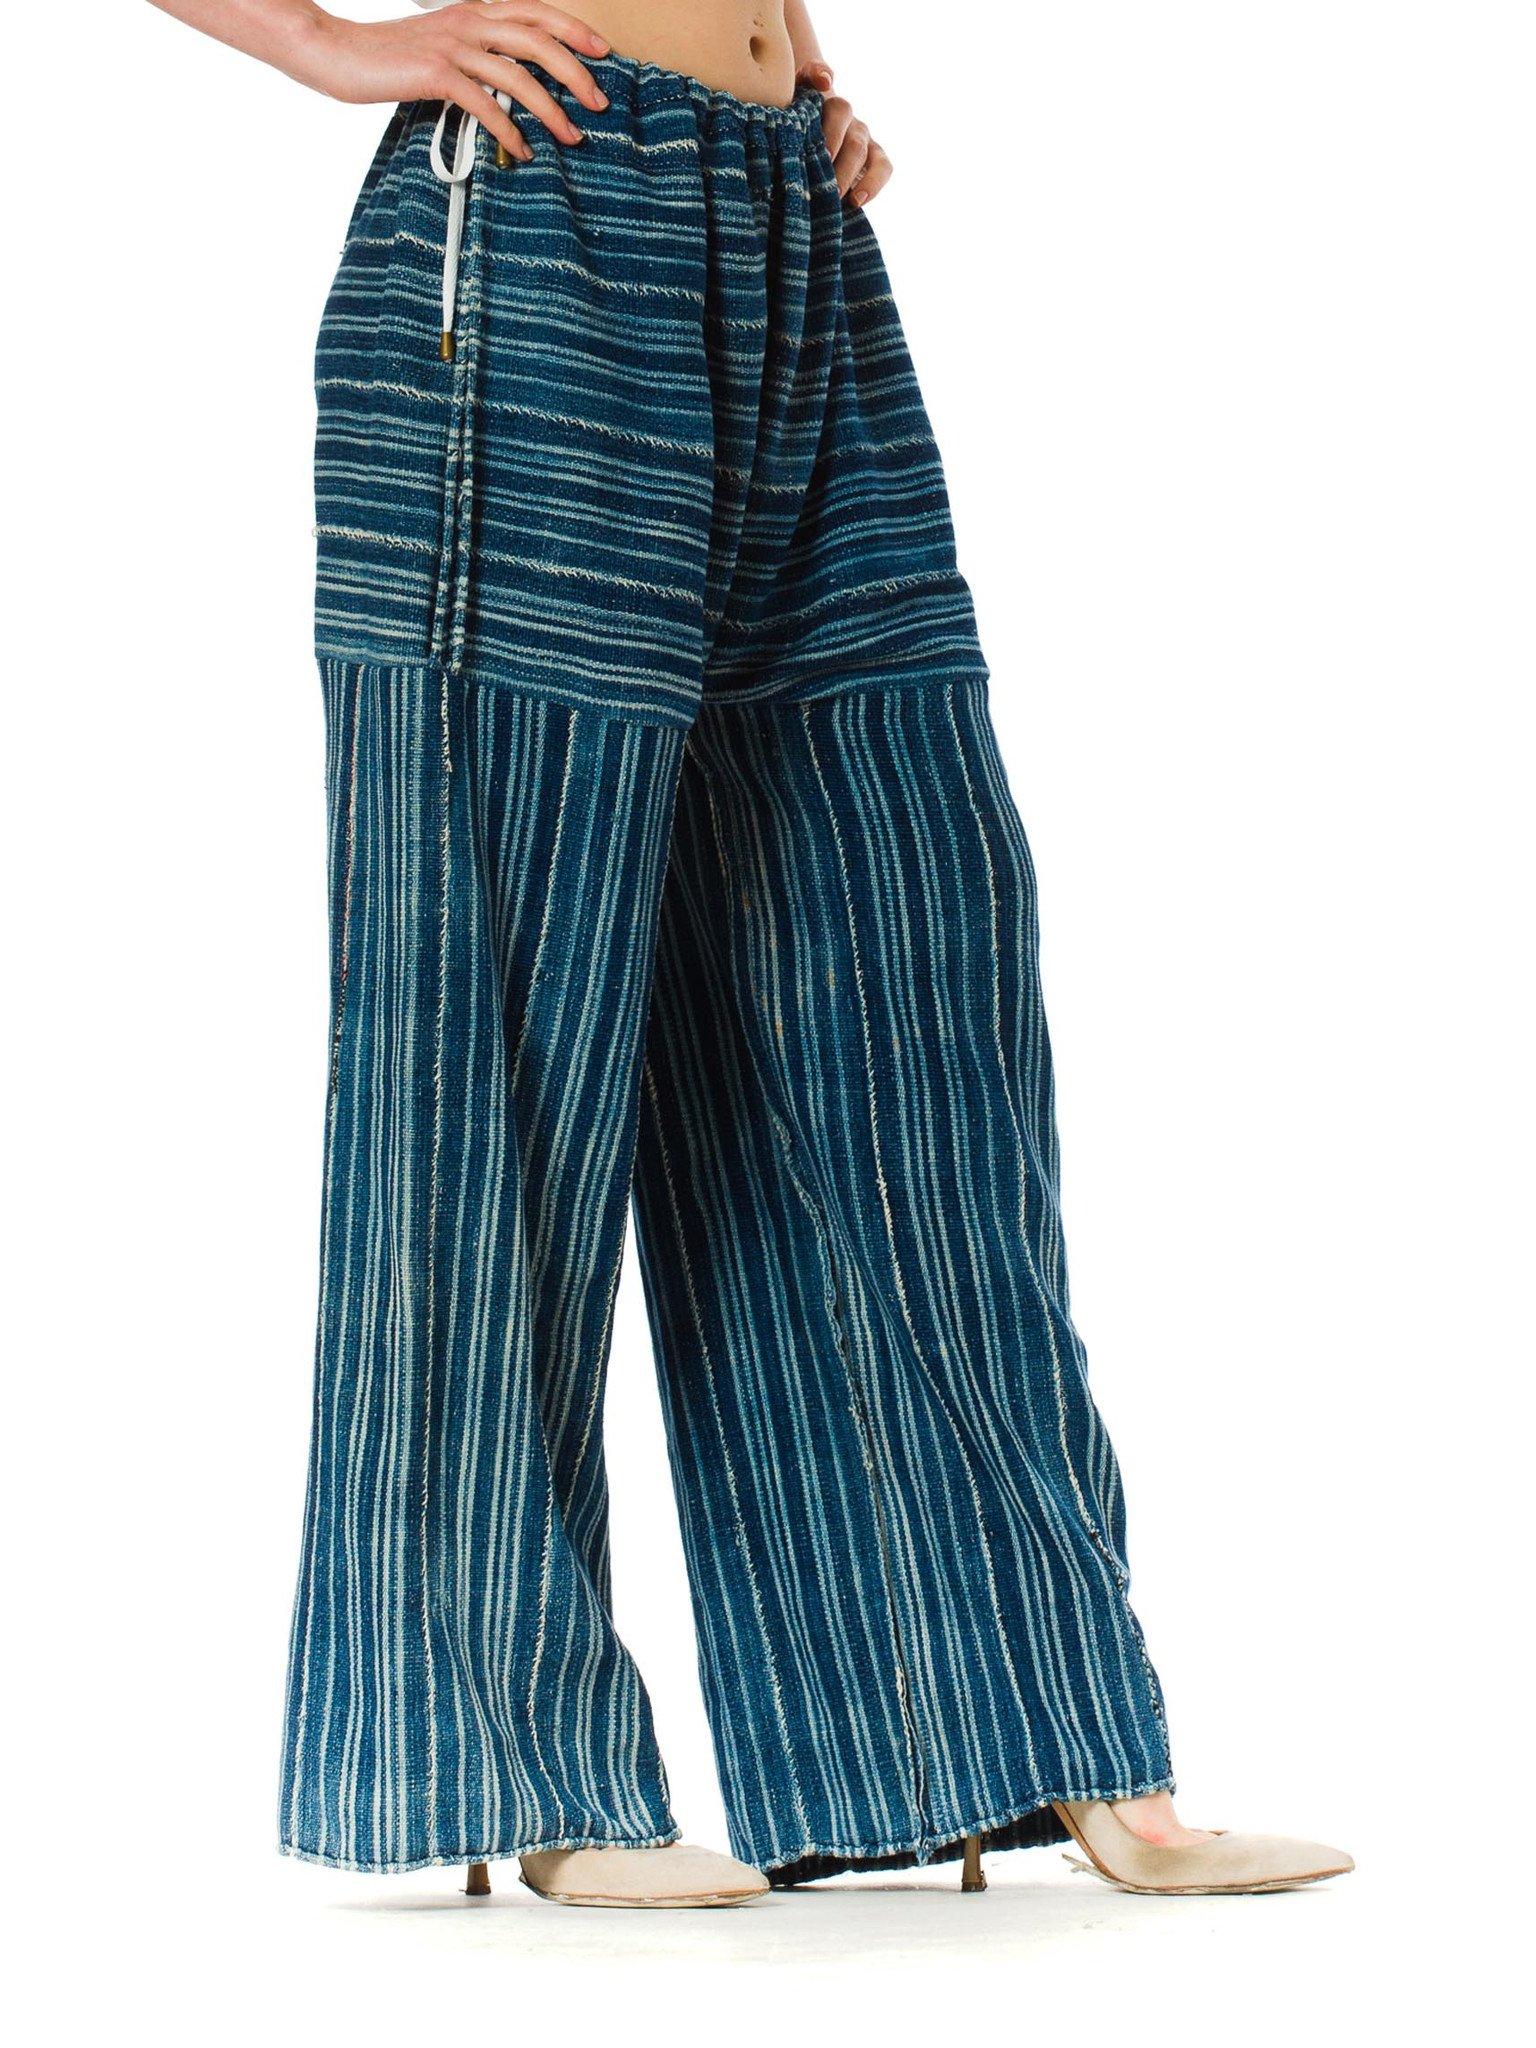 Women's MORPHEW COLLECTION Indigo Blue Cotton Summer Palazzo Pants Made Of African Hand